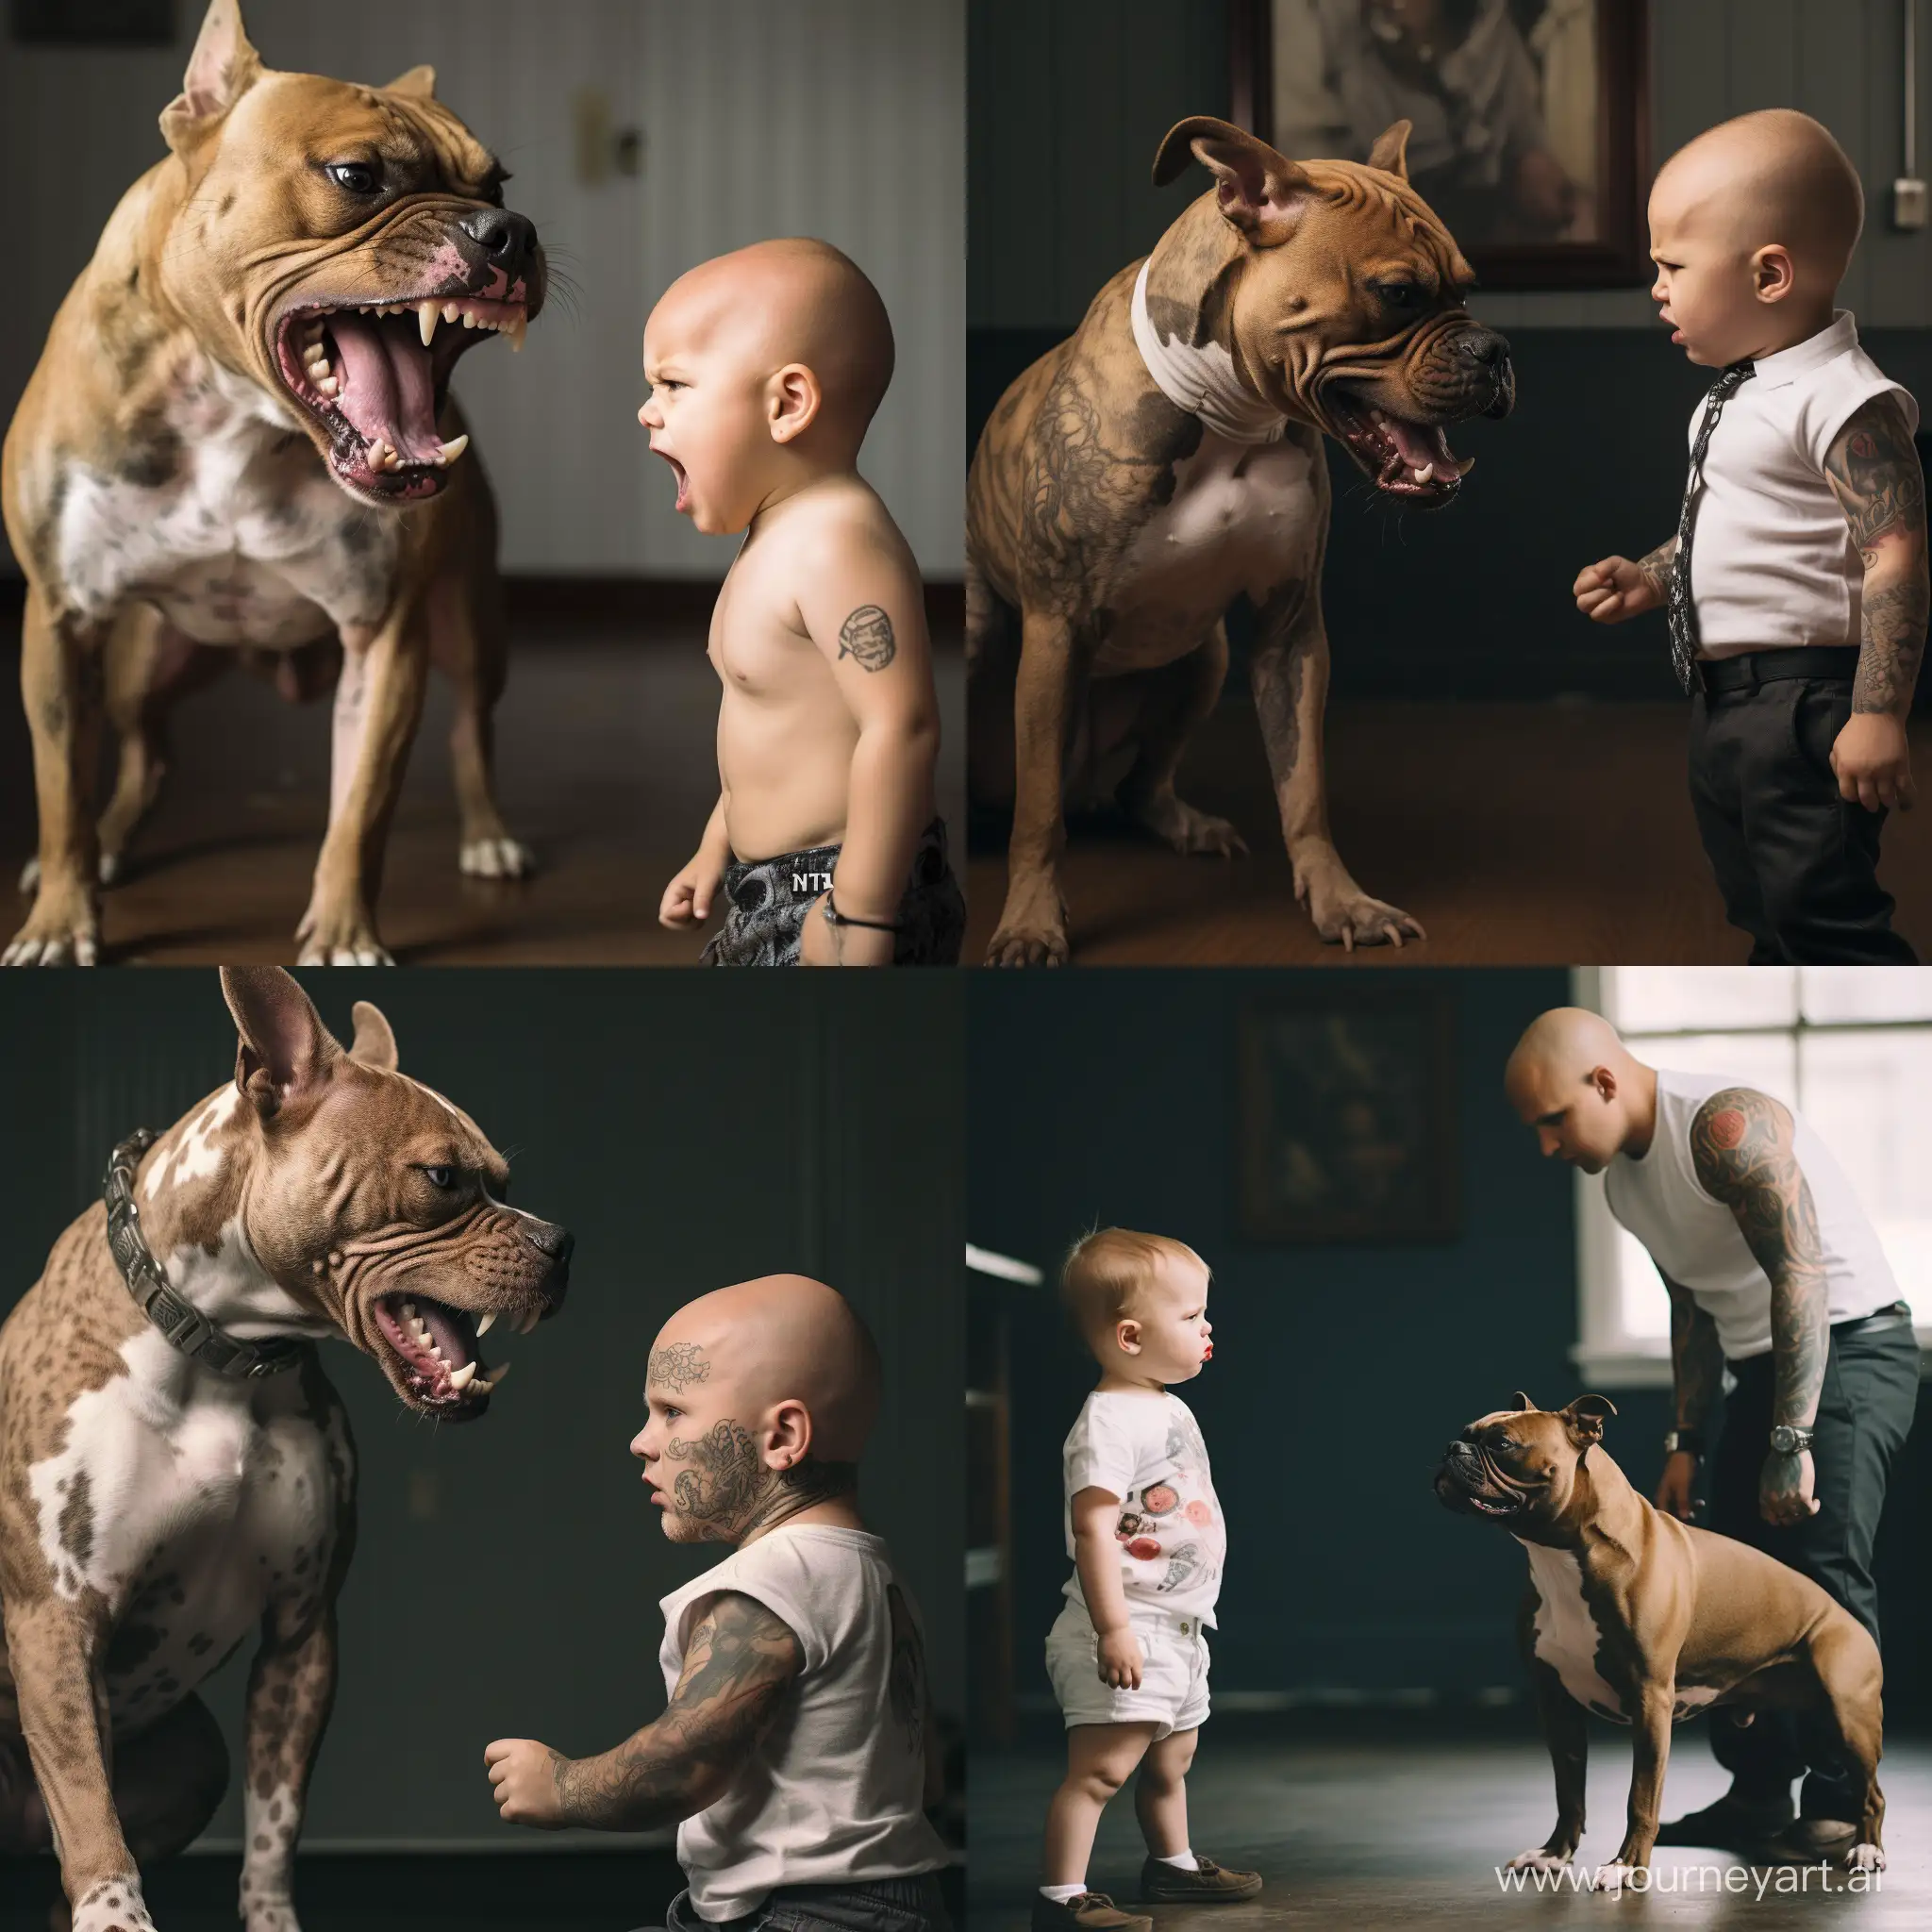 Fierce-Confrontation-Between-Angry-Pitbull-and-Toddler-in-Fiery-Stare-Down